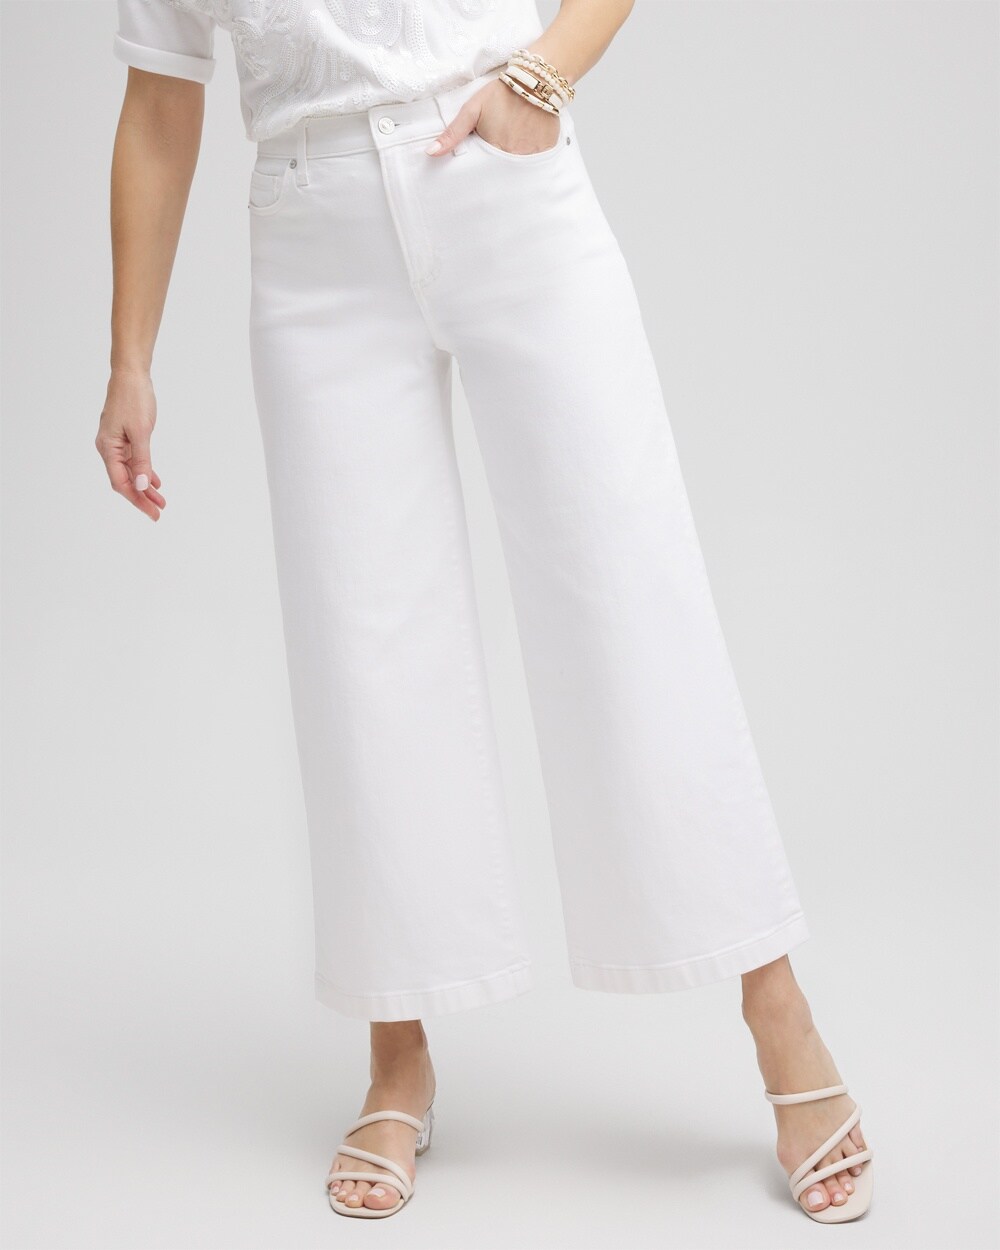 Chico's High Rise Wide Leg Cropped Jeans In White Size 16p/18p Petite |